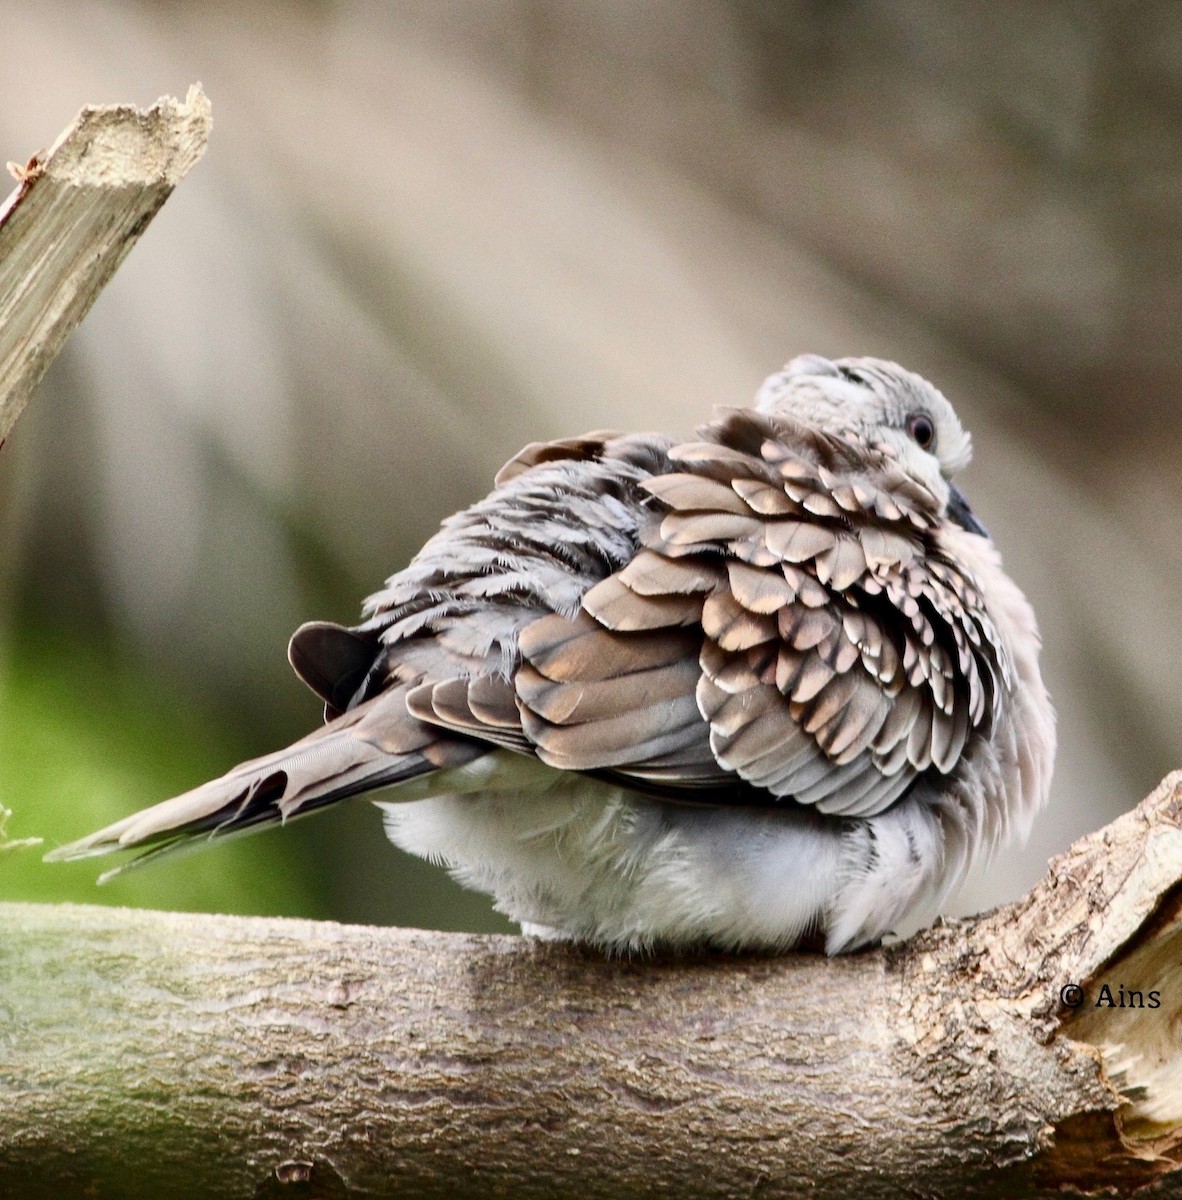 Spotted Dove - Ains Priestman